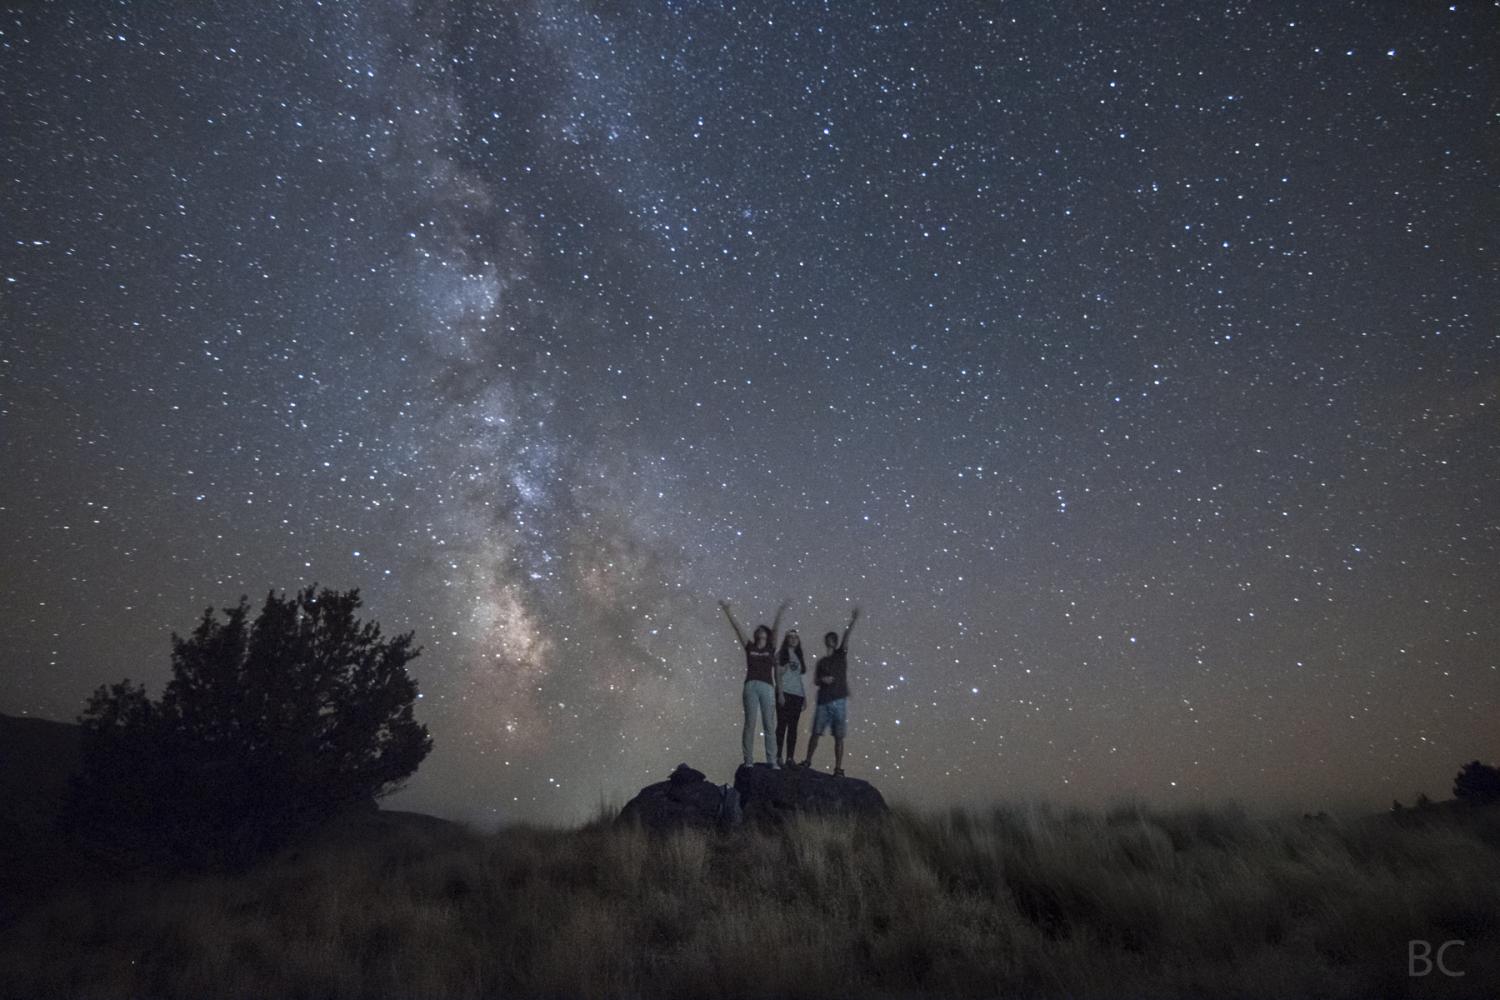 At ISO 400,000, this 6-minute film shows why we love the night